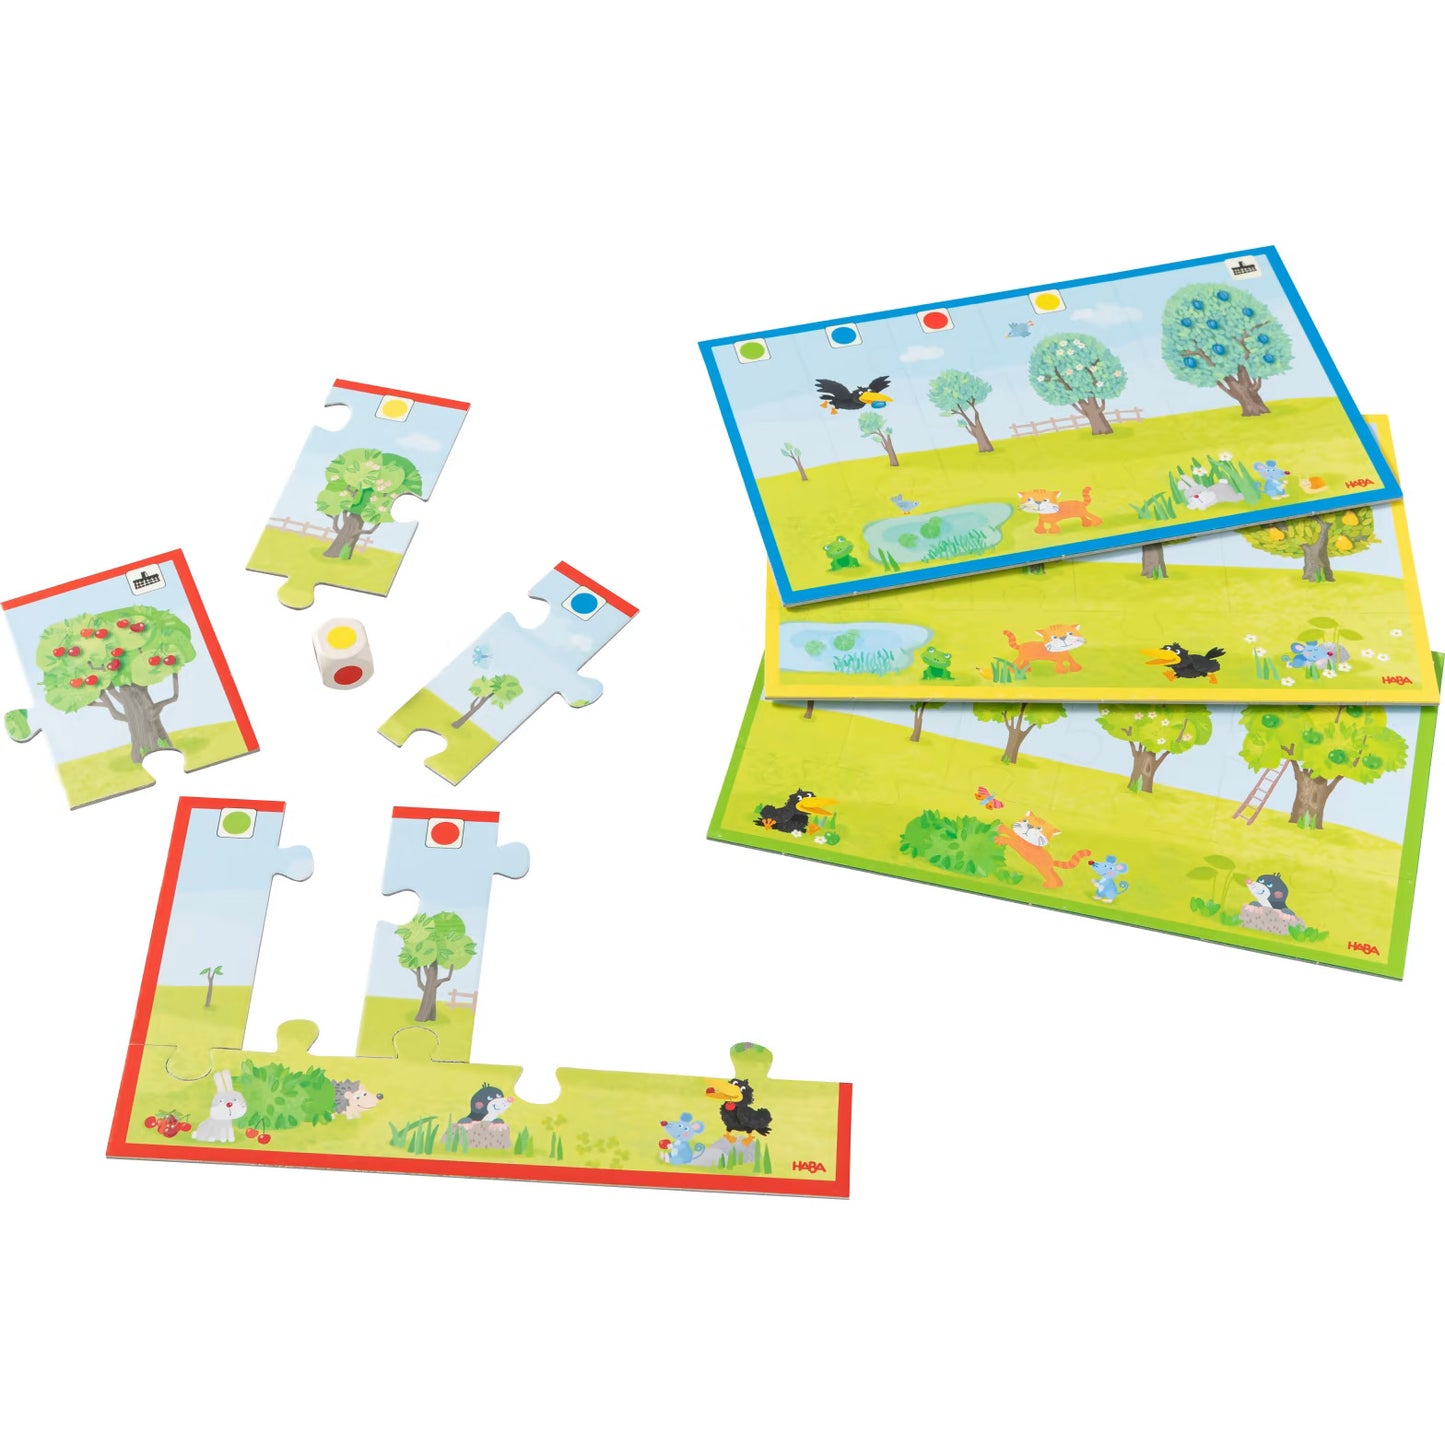 Haba My Great Big Orchard Game Collection 10 in 1 記憶力合作遊戲10合1